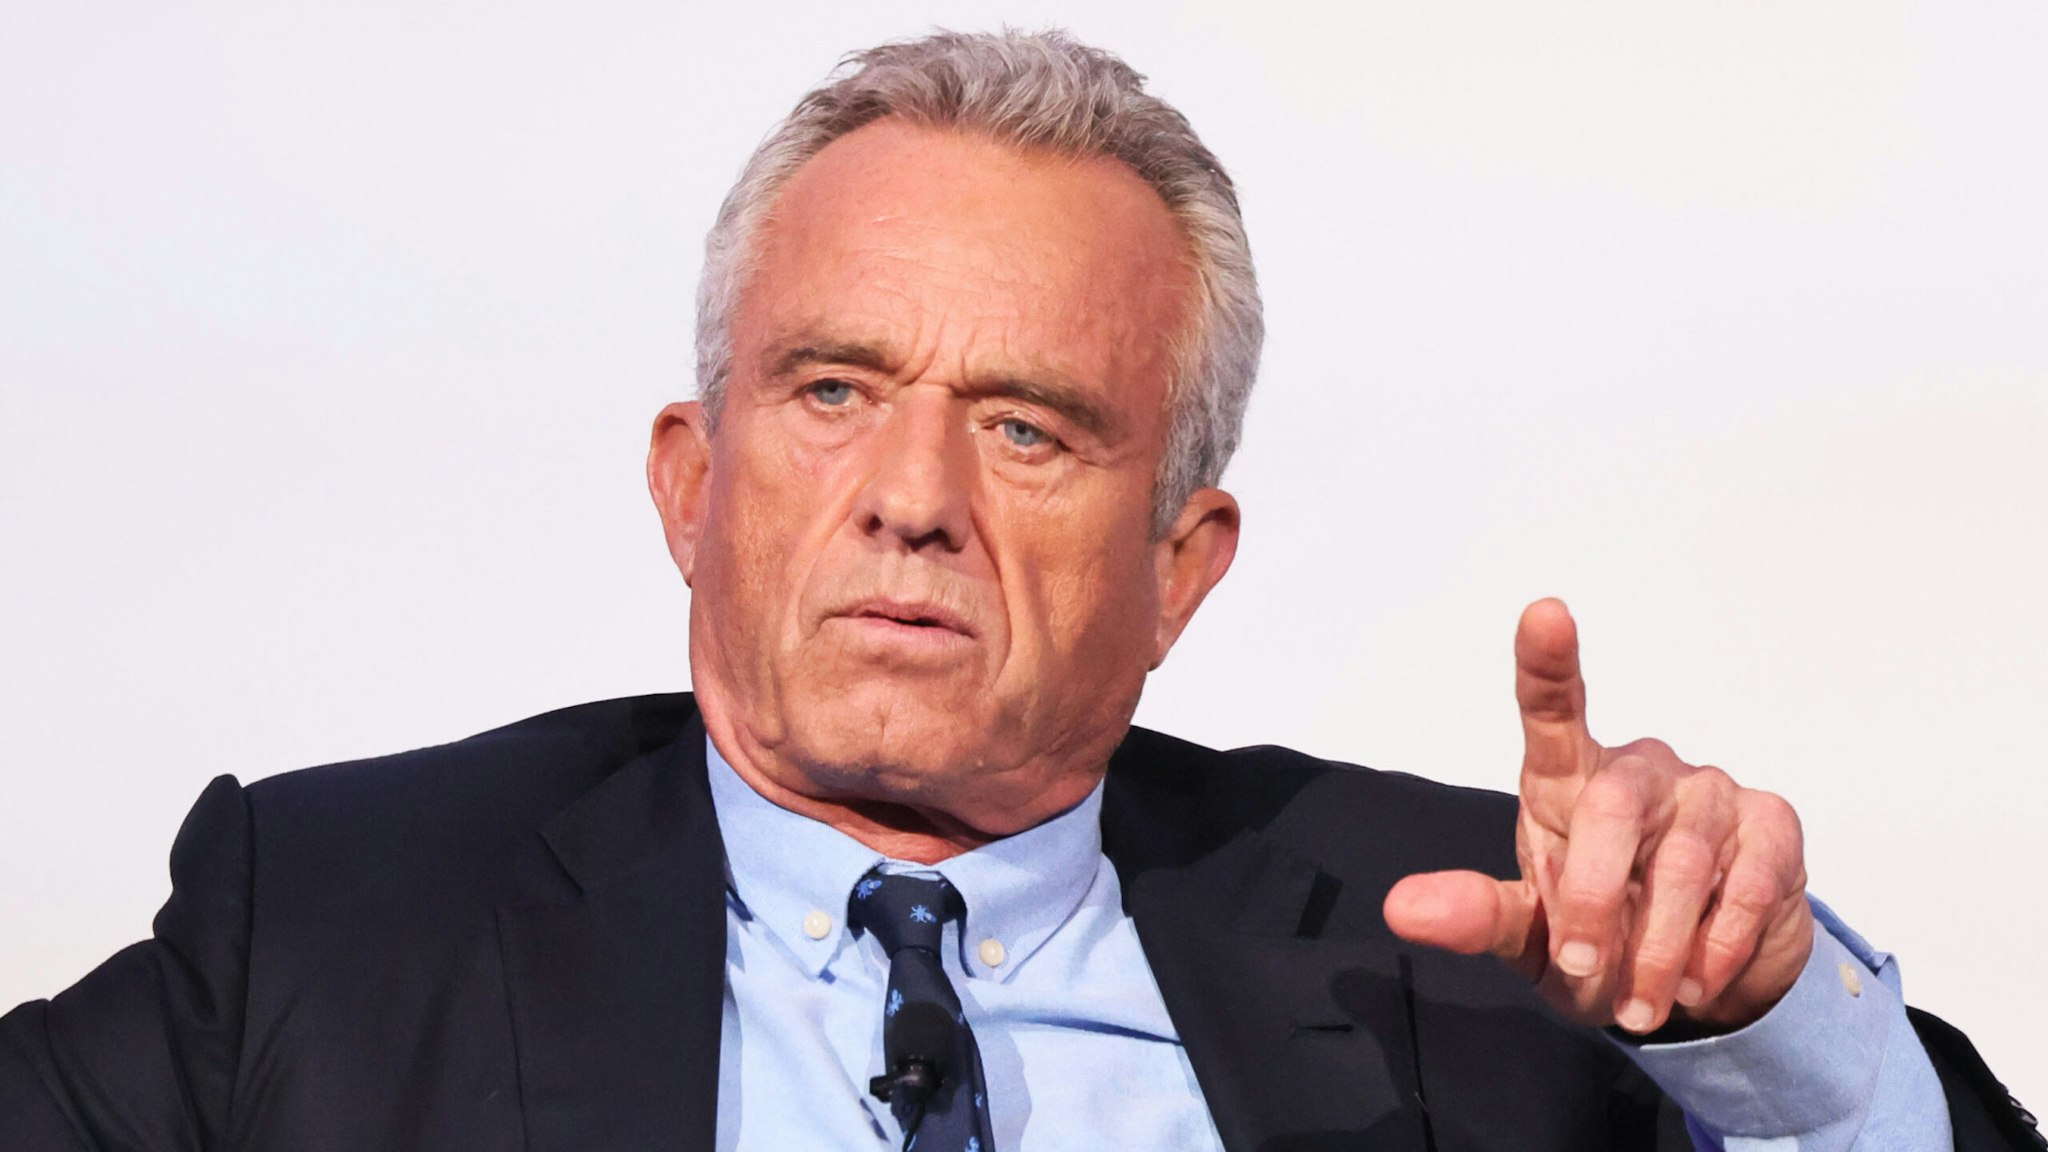 NEW YORK, NEW YORK - JULY 25: Democratic Presidential Candidate Robert F. Kennedy Jr. speaks during the World Values Network's Presidential candidate series at the Glasshouse on July 25, 2023 in New York City. Kennedy Jr., who is running a longshot primary campaign against President Joe Biden, joined Rabbi Shmuley Boteach to discuss fighting antisemitism and the championing of Israel. Kennedy has faced backlash for his stances on vaccines, most recently for comments he made suggesting that the coronavirus (COVID-19) disease could have been “targeted to attack Caucasians and Black people,” while sparing Jewish and Chinese people. He has denied allegations of racism and antisemitism.